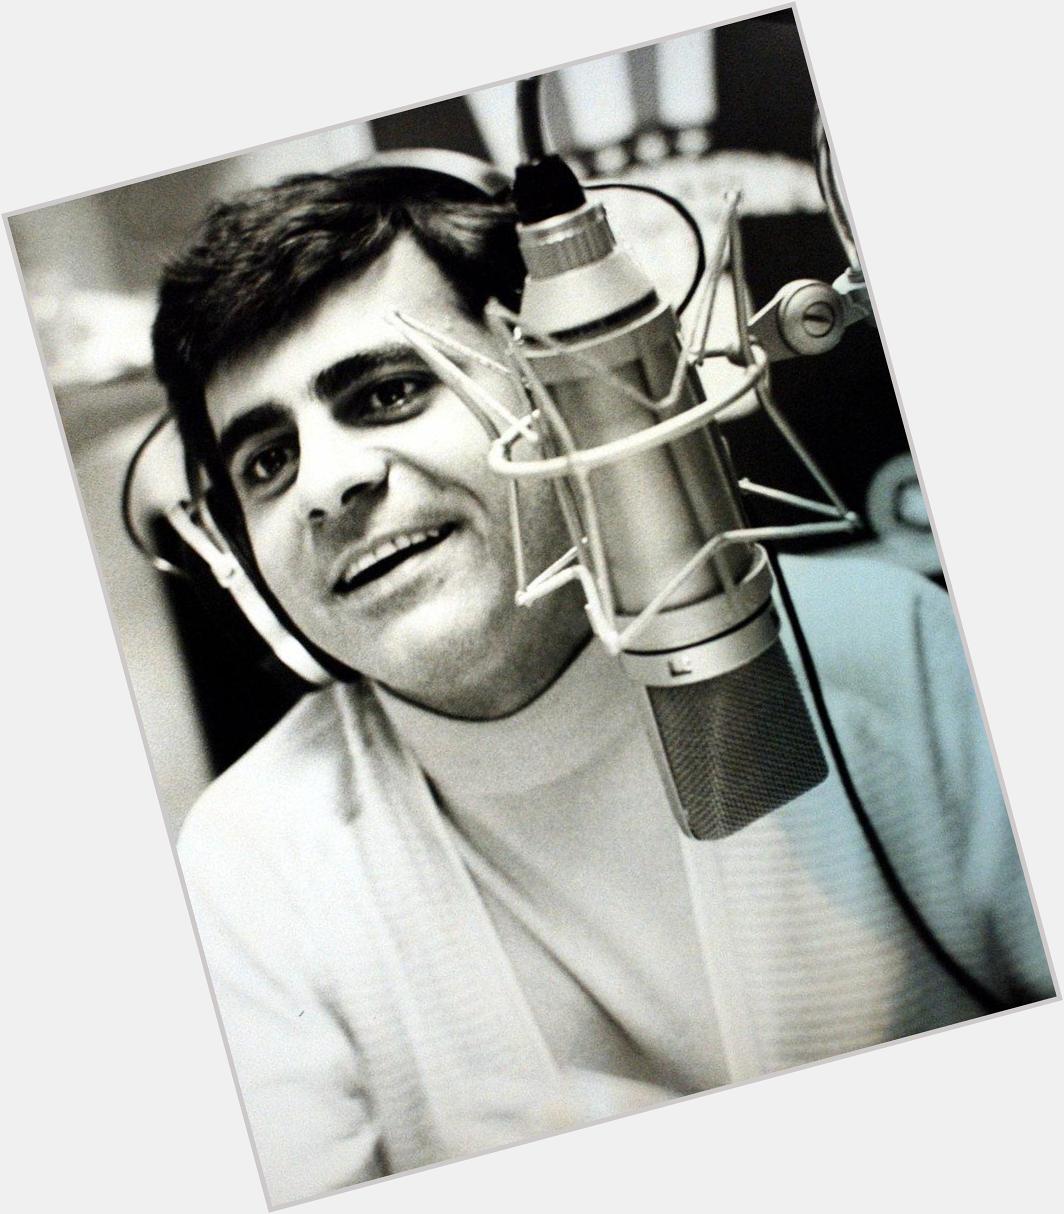   wishes the late Casey Kasem (1932 - 2014), a very happy birthday 